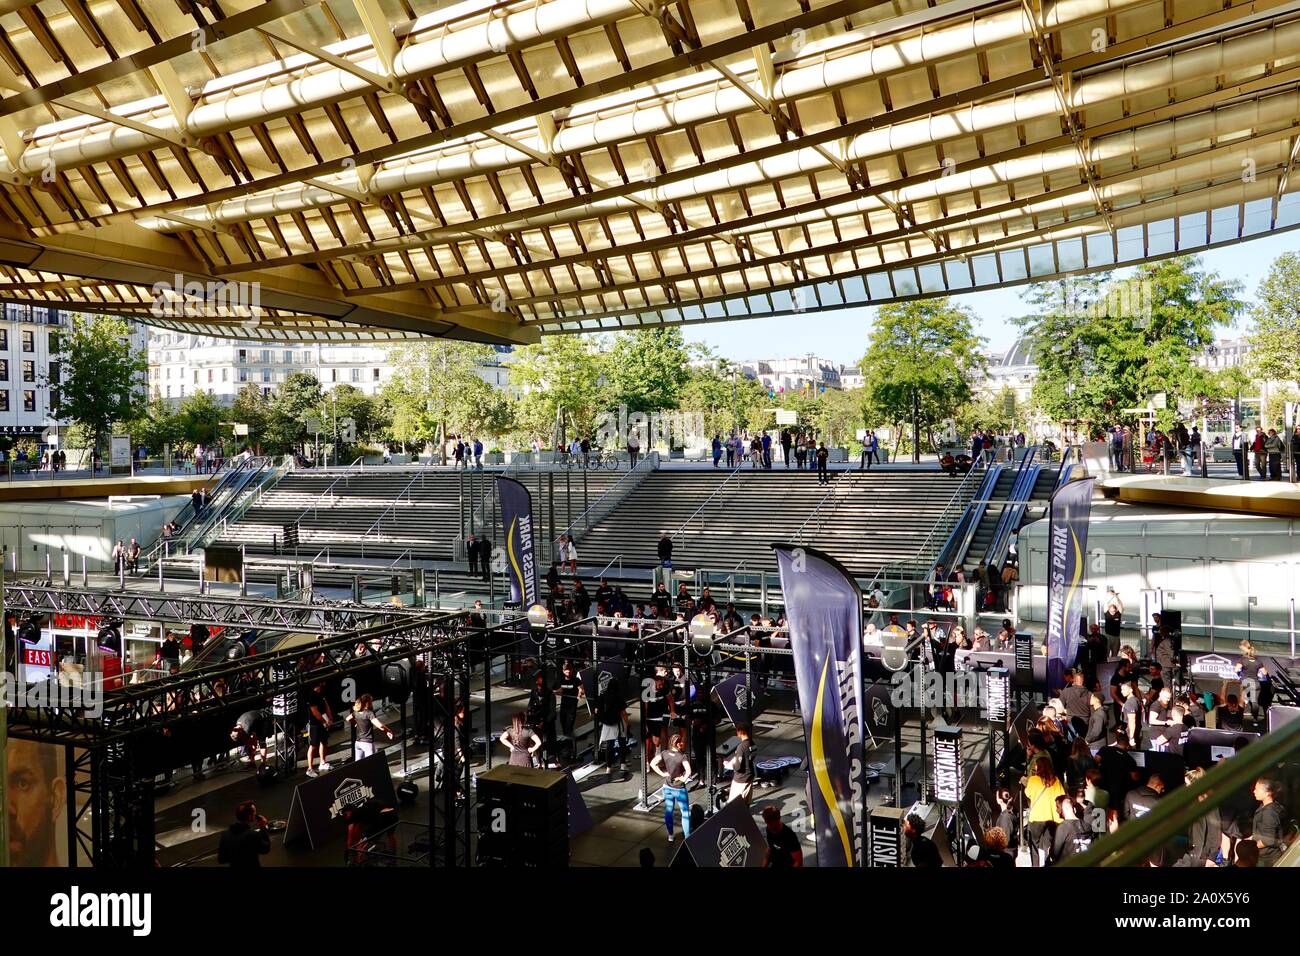 Saturday morning fitness event under the canopy at Westfield Forum Les Halles, Paris, France Stock Photo